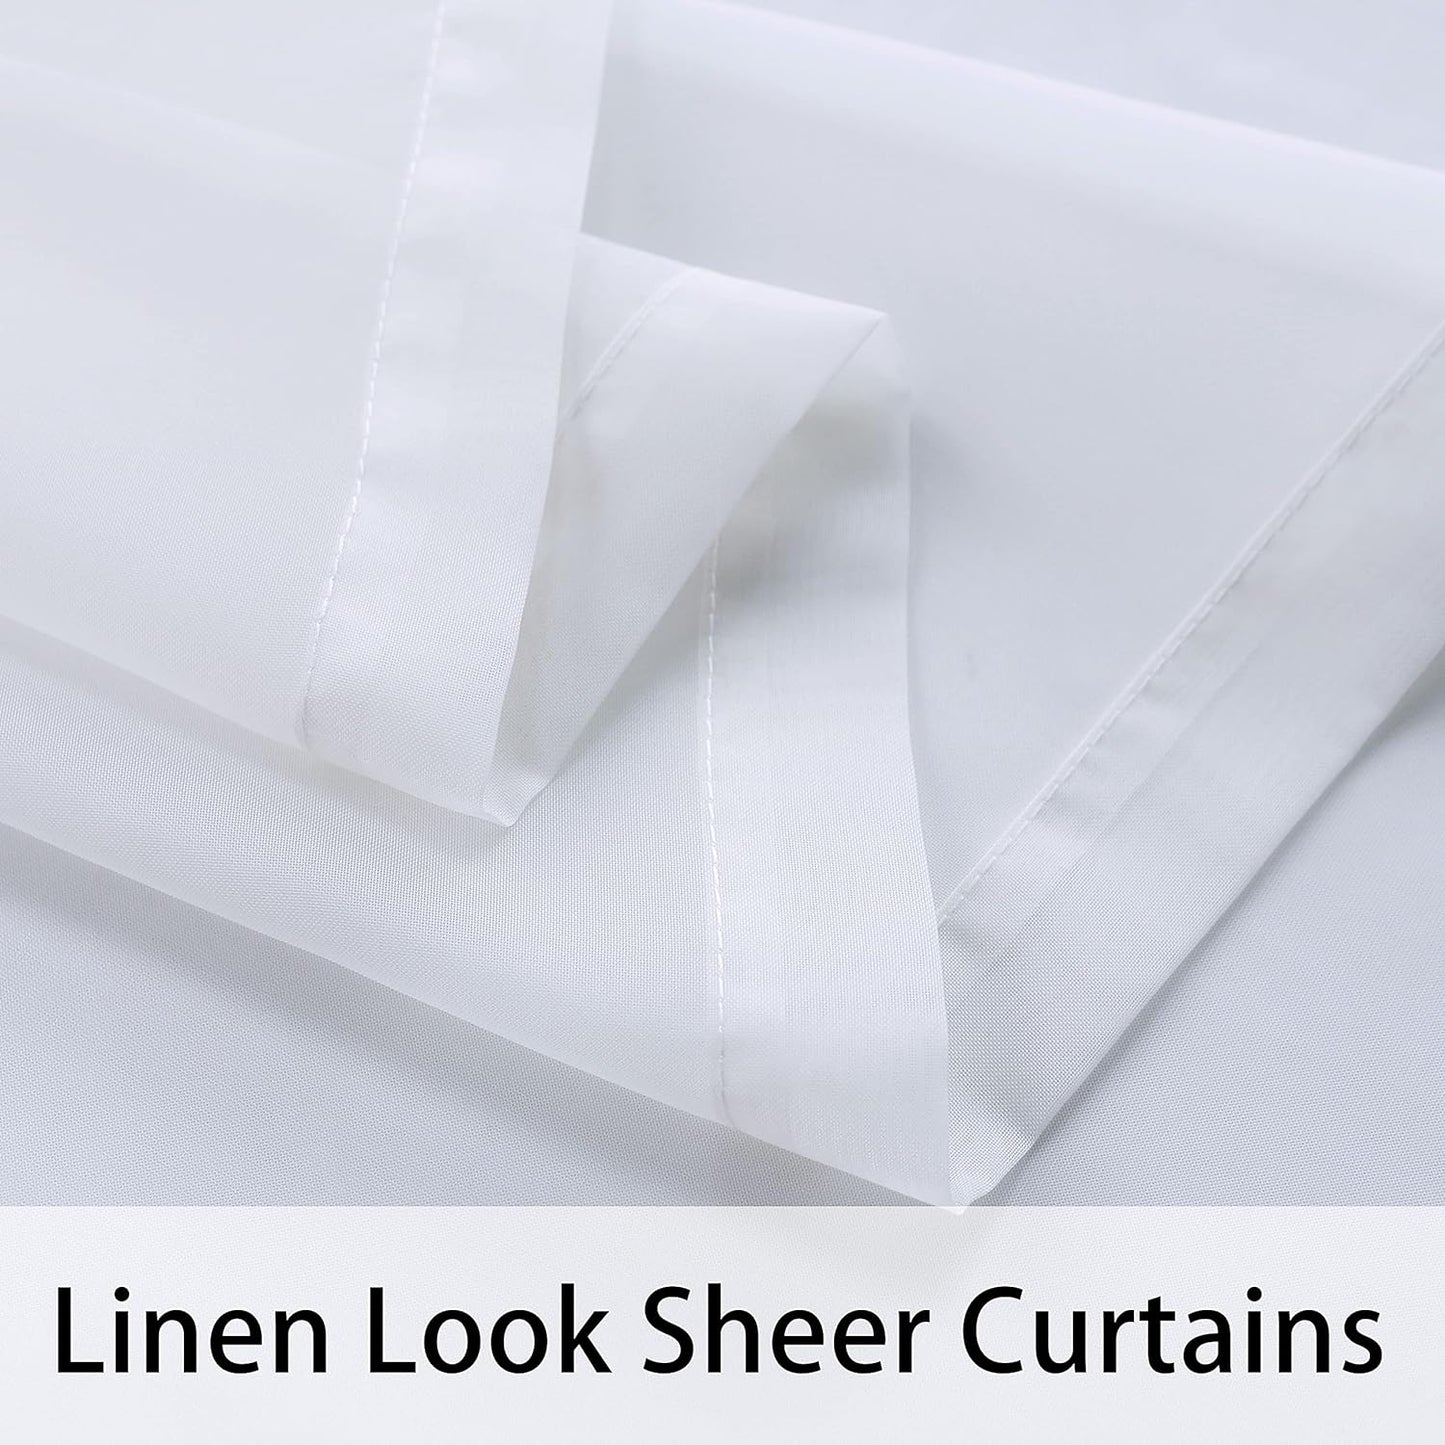 BONZER White Outdoor Sheer Curtains for Patio Waterproof - 2 Panels Grommet Indoor Voile Sheer Curtain for Living Room, Bedroom, Porch, Pergola, Cabana,54 X 84 Inch, White  BONZER   